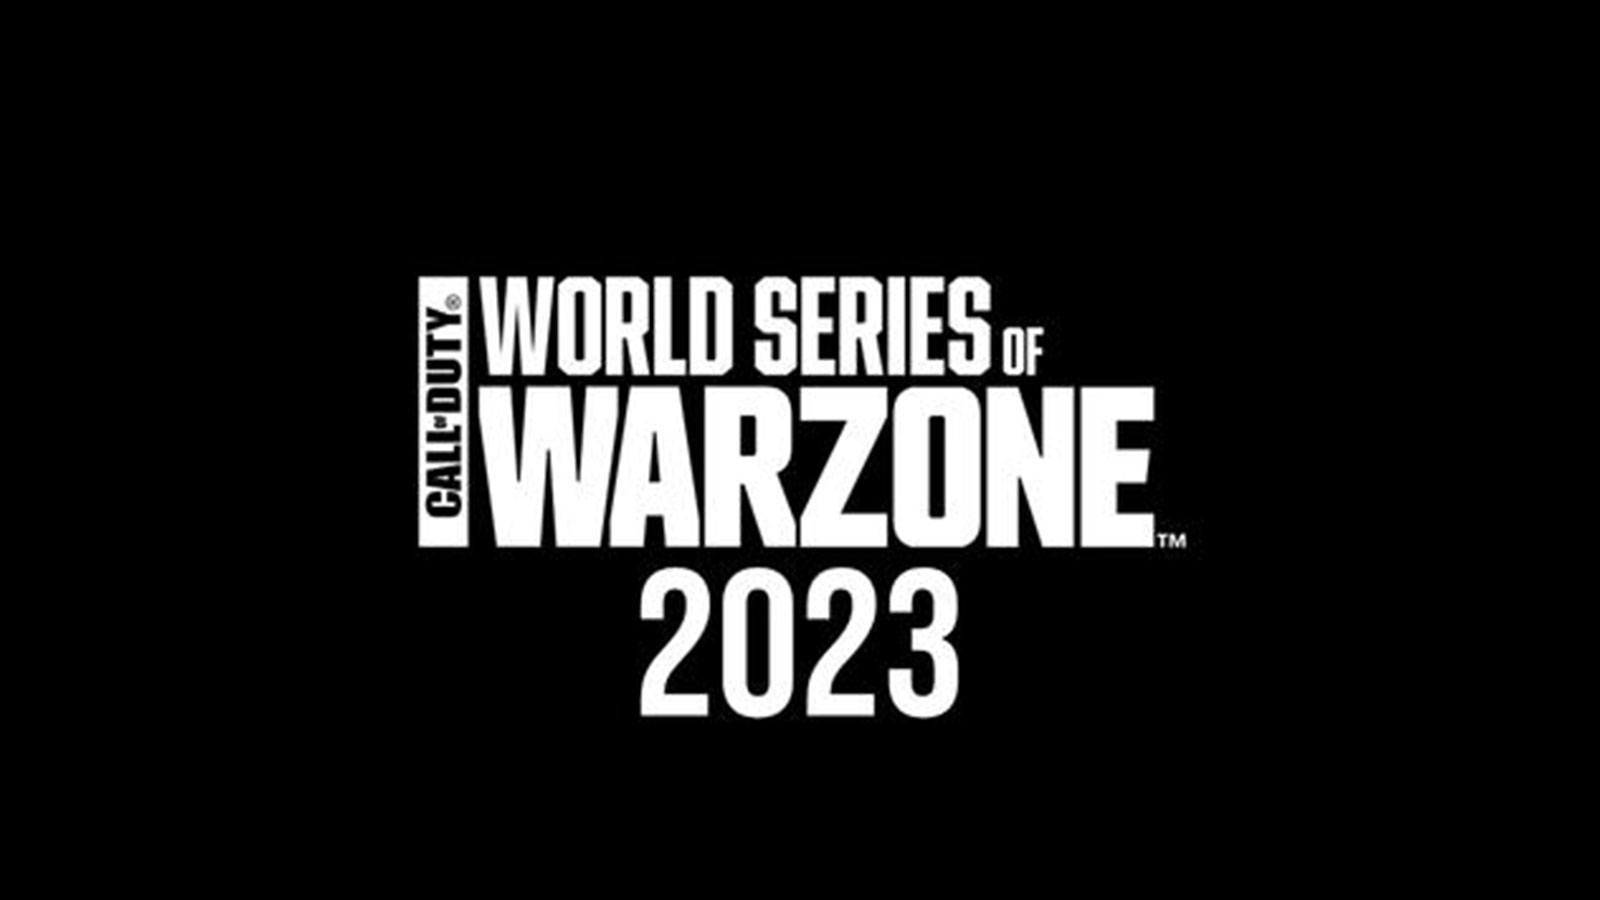 World Series of Warzone 202